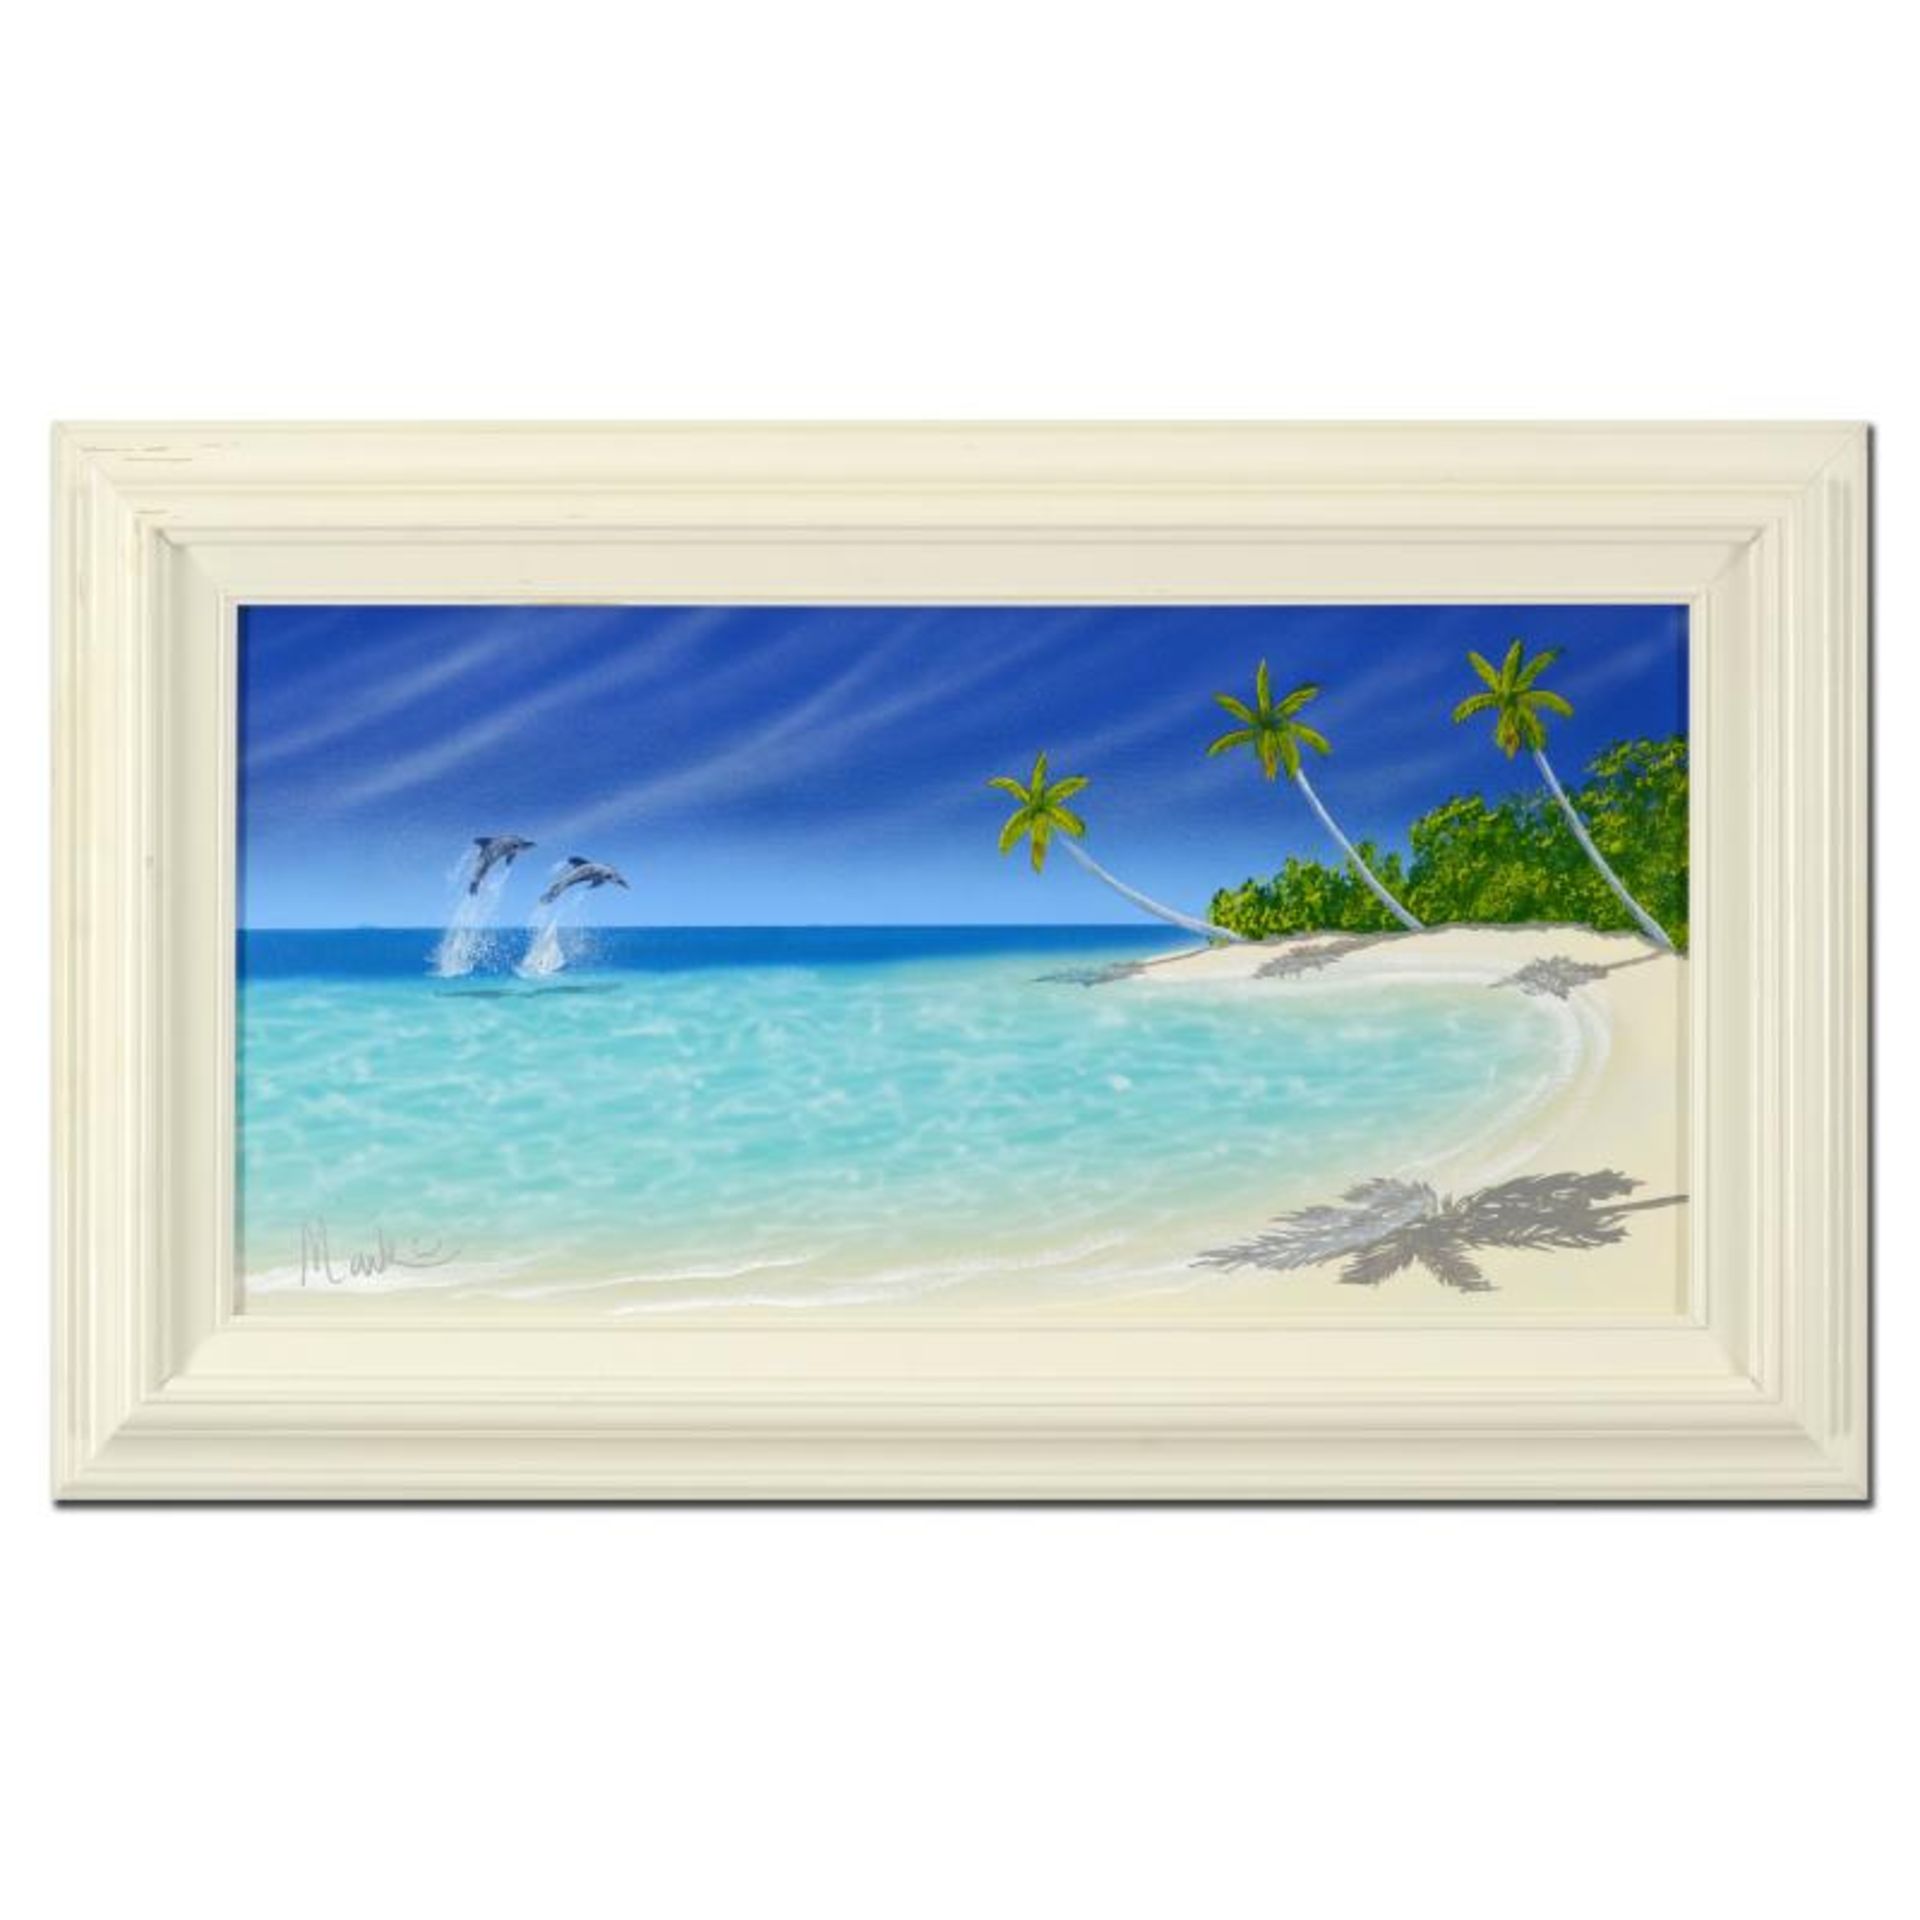 Dan Mackin, "The Luxury of Quiet Time" Framed Original Oil Painting on Canvas Ha